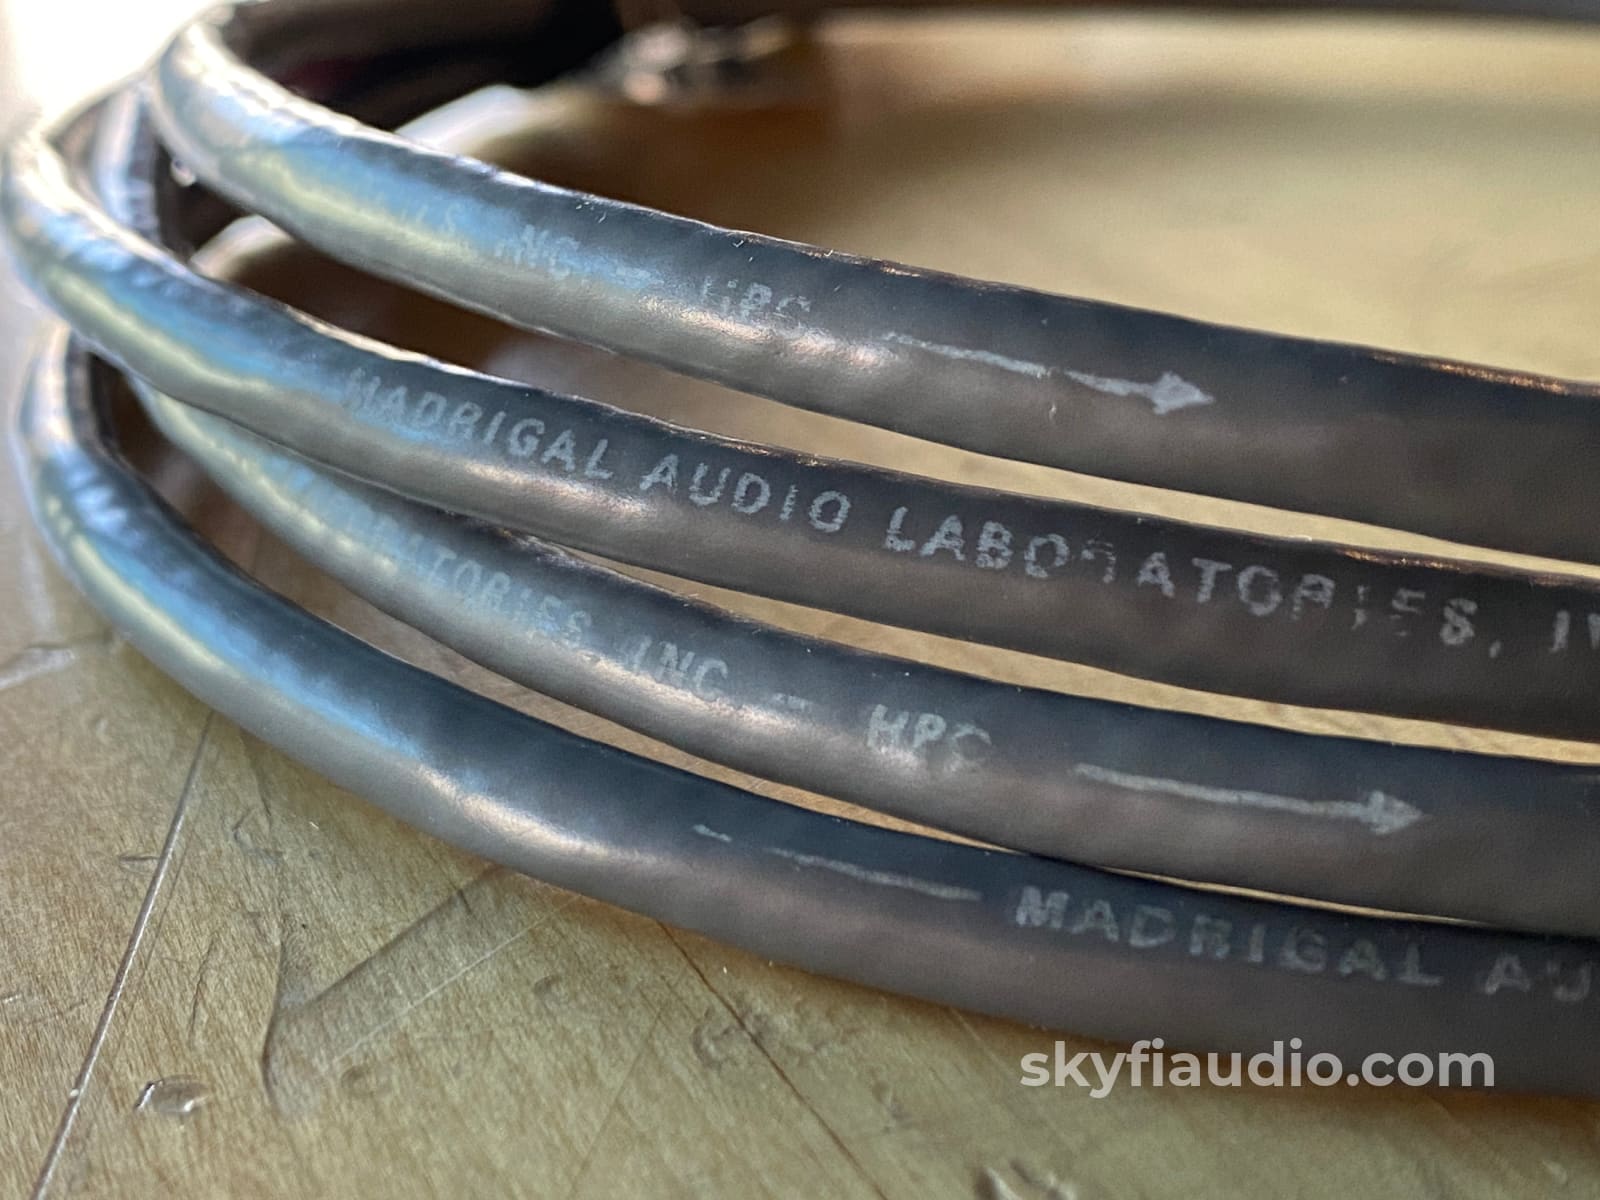 Madrigal Audio Labs (Mark Levinson) Camac To Rca Interconnects (Pair) - 1 Meter Rare Cables